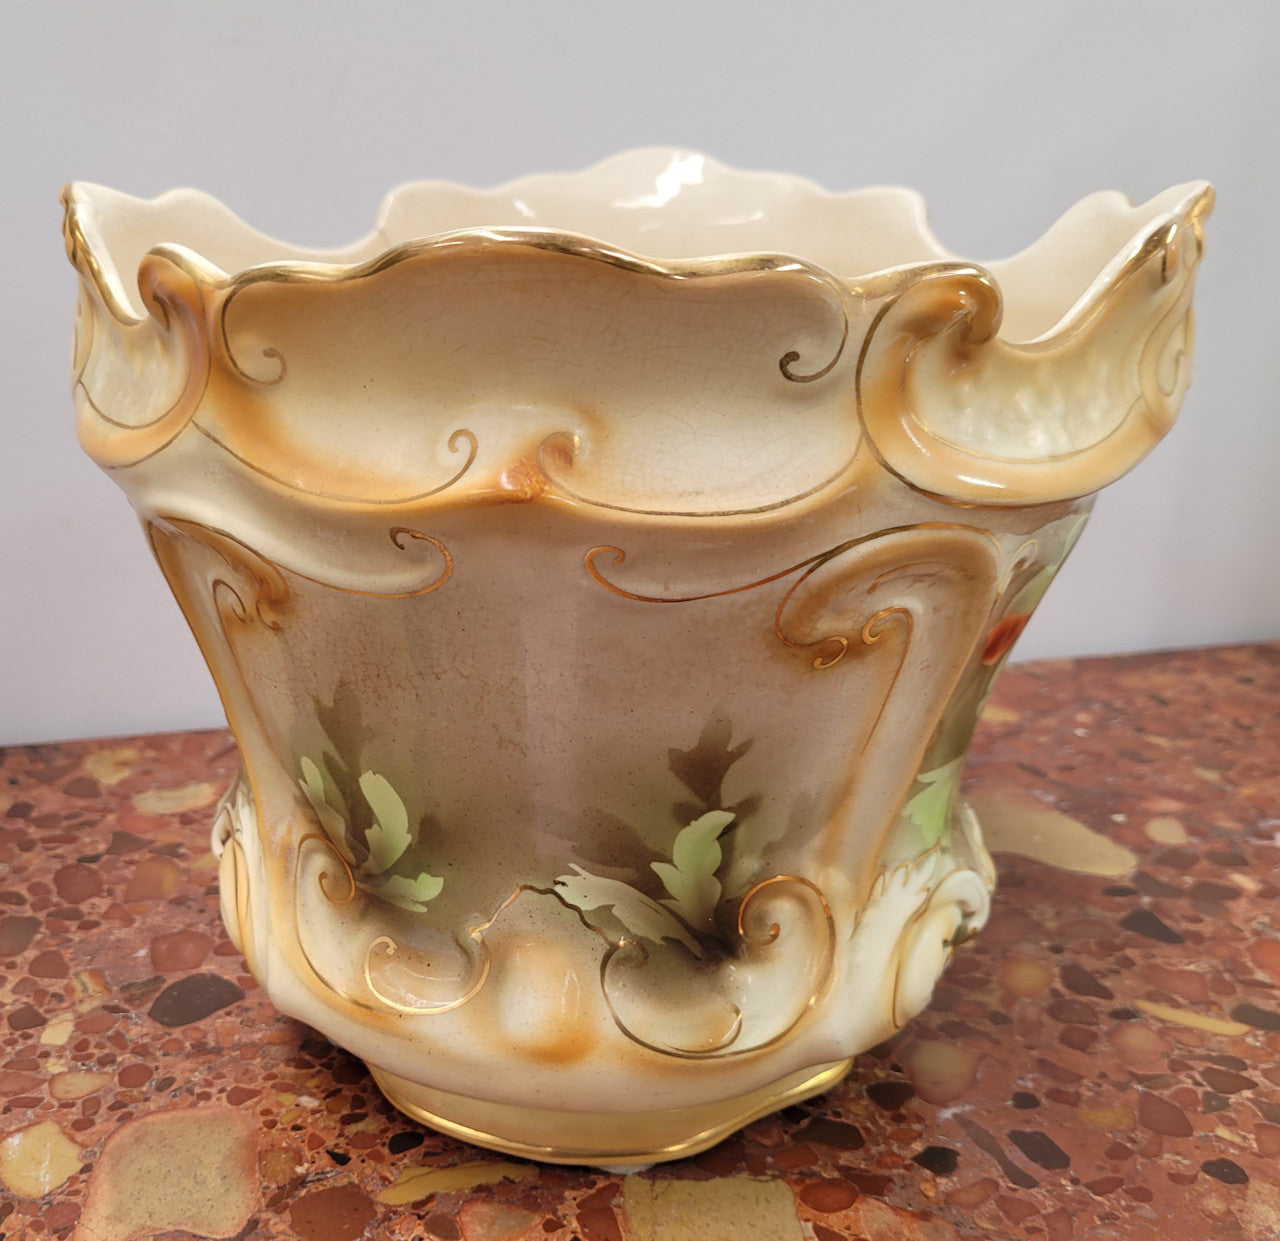 Lovely Antique jardiniere with beautiful poppies in soft pastel colours. Please note that it is being sold in as found condition, please view photos as they help form part of the description.